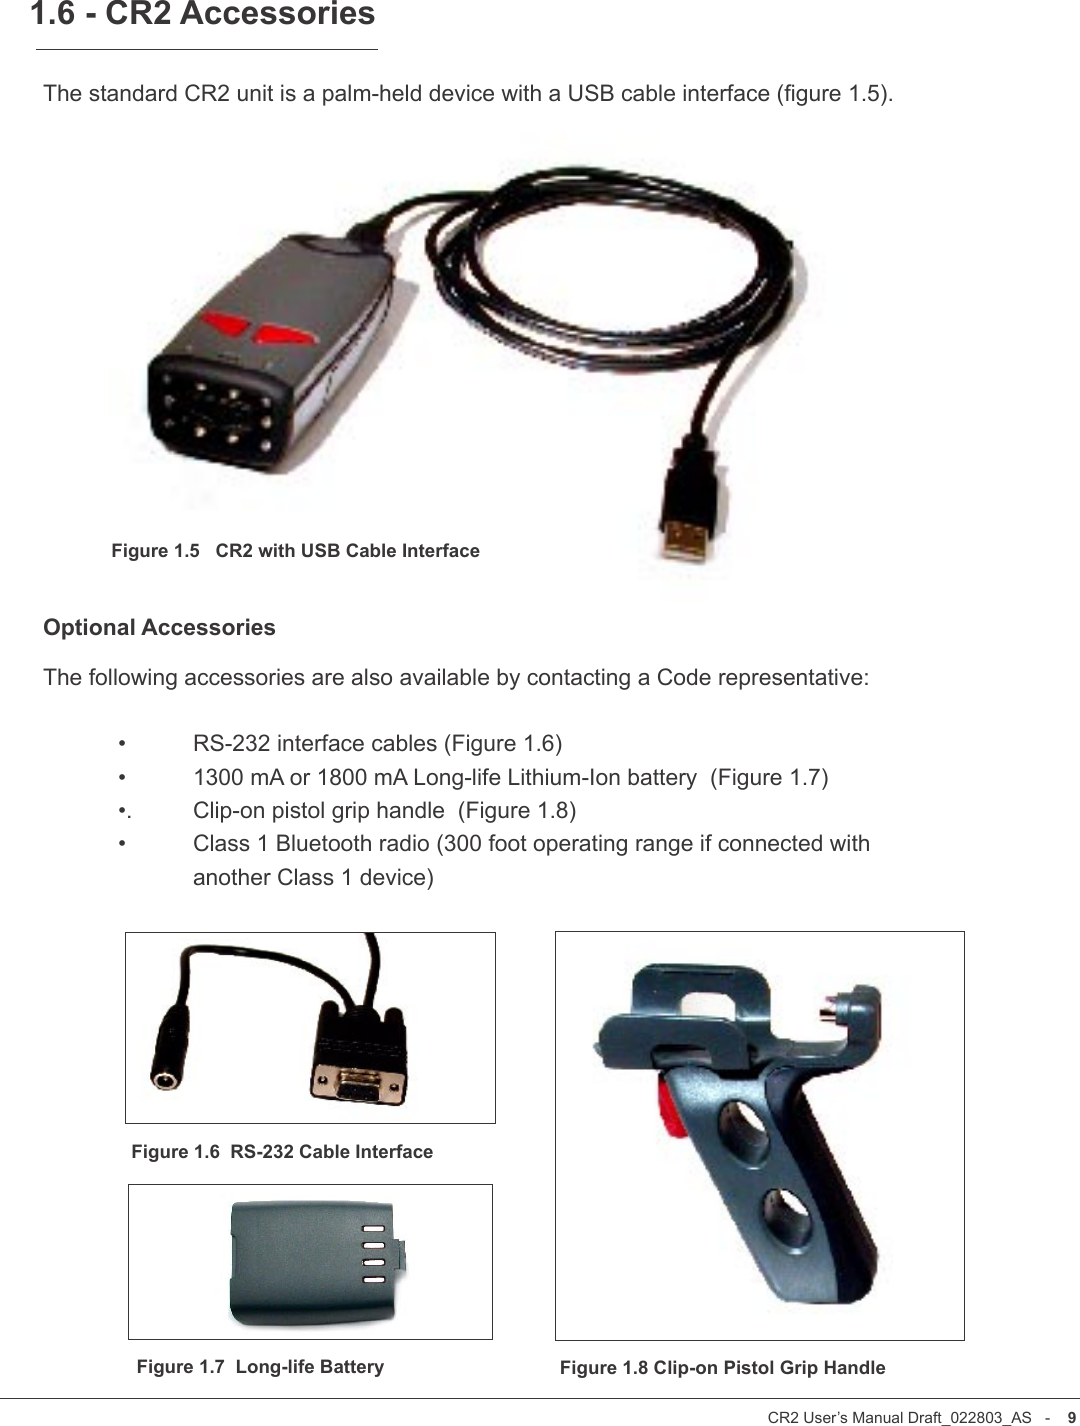 CR2 User’s Manual Draft_022803_AS   -    8CR2 User’s Manual Draft_022803_AS   -    9The standard CR2 unit is a palm-held device with a USB cable interface (gure 1.5). Optional AccessoriesThe following accessories are also available by contacting a Code representative:  •  RS-232 interface cables (Figure 1.6)  •  1300 mA or 1800 mA Long-life Lithium-Ion battery  (Figure 1.7)  •.  Clip-on pistol grip handle  (Figure 1.8)  •   Class 1 Bluetooth radio (300 foot operating range if connected with     another Class 1 device) 1.6 - CR2 AccessoriesFigure 1.5   CR2 with USB Cable InterfaceFigure 1.6  RS-232 Cable InterfaceFigure 1.8 Clip-on Pistol Grip HandleFigure 1.7  Long-life Battery